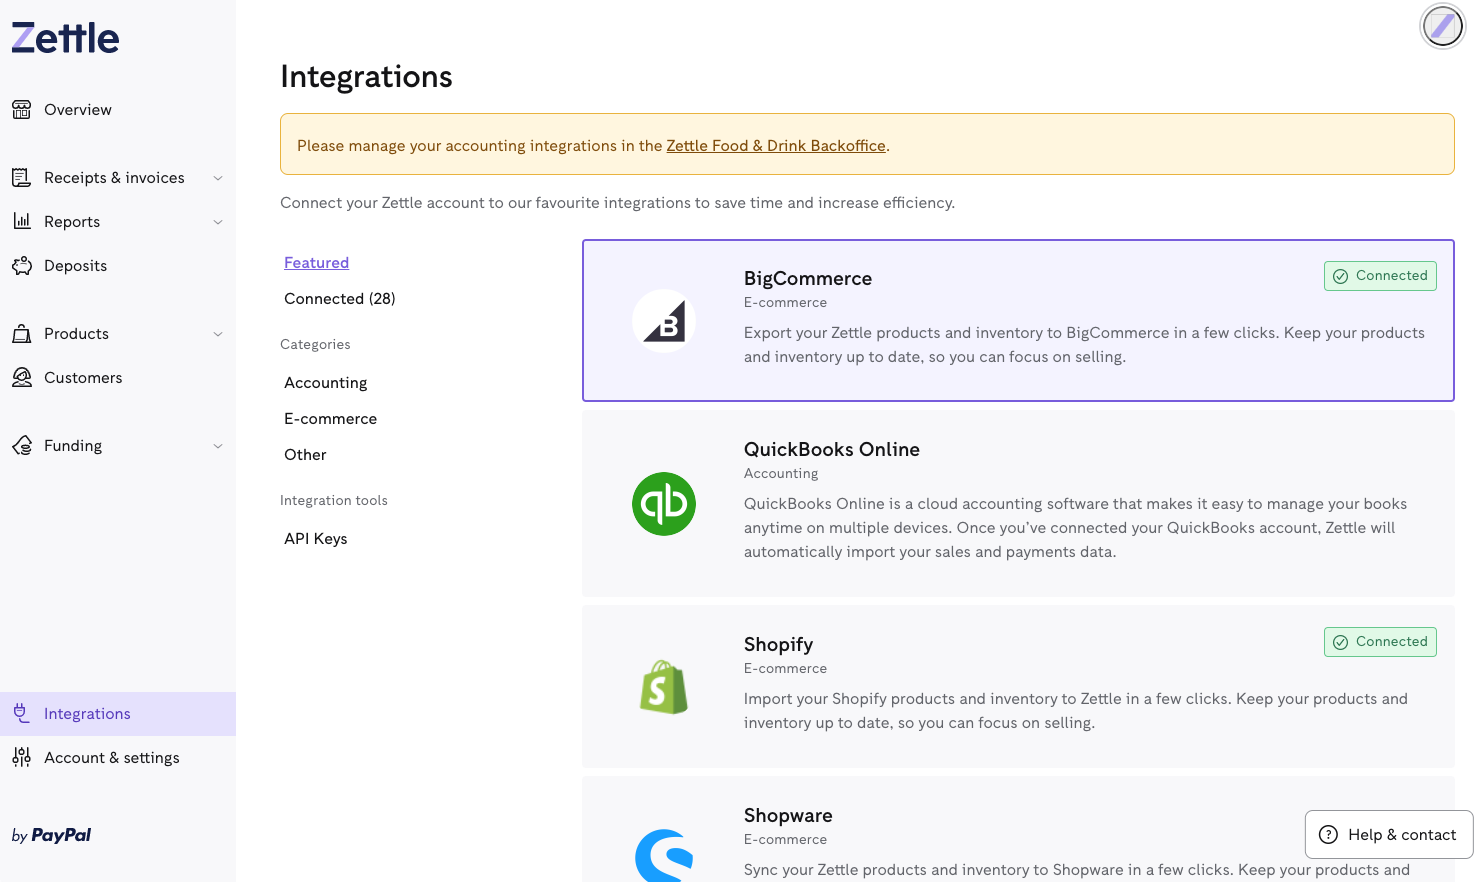 The Integrations page with the API keys link in the lower left corner of the left navigation menu.